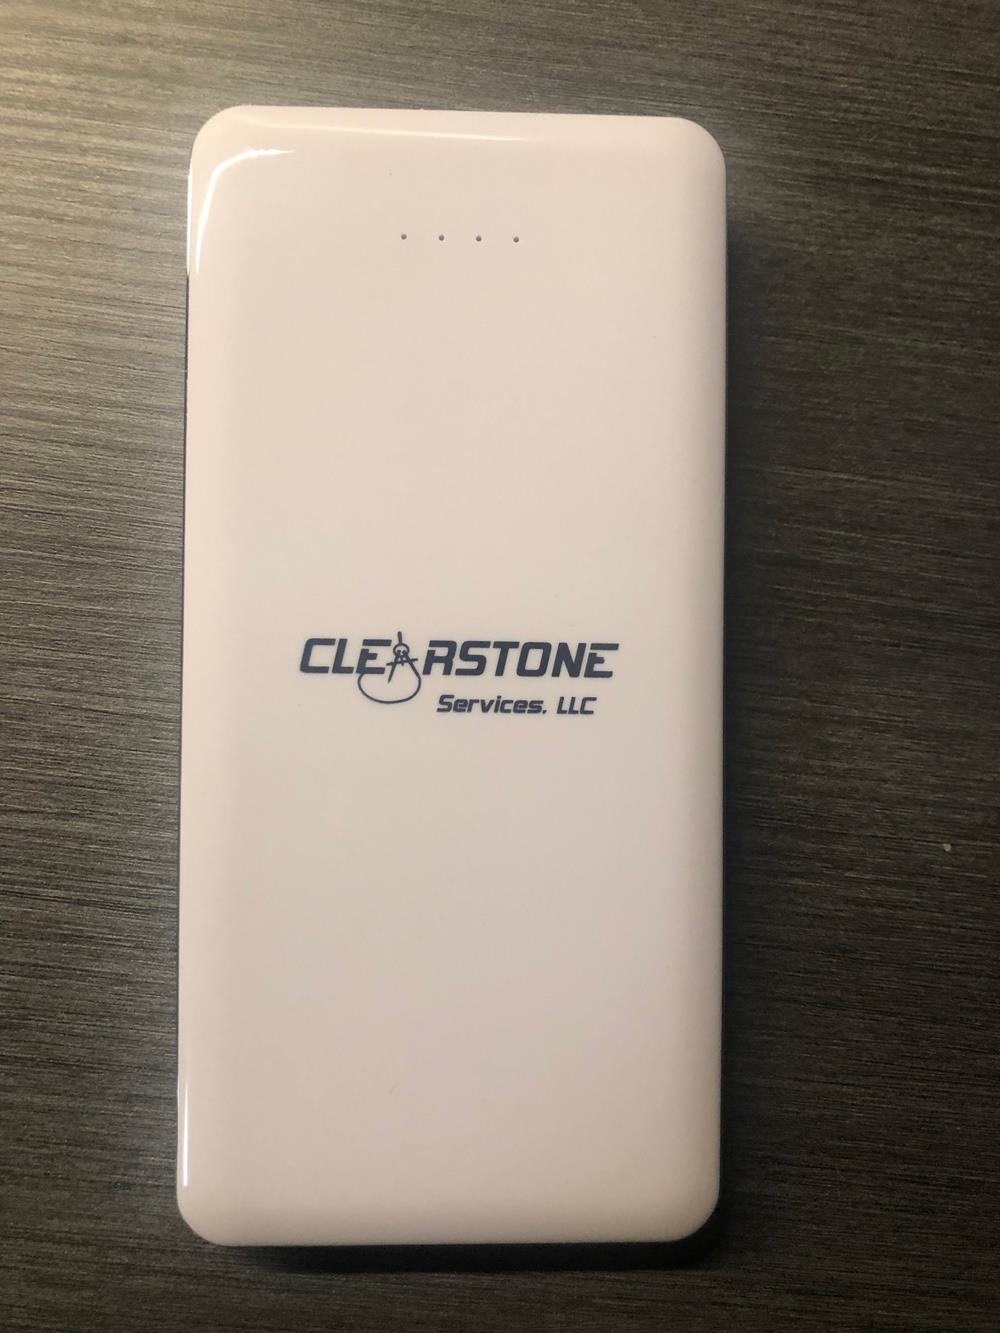 a white rectangular device with a logo on it